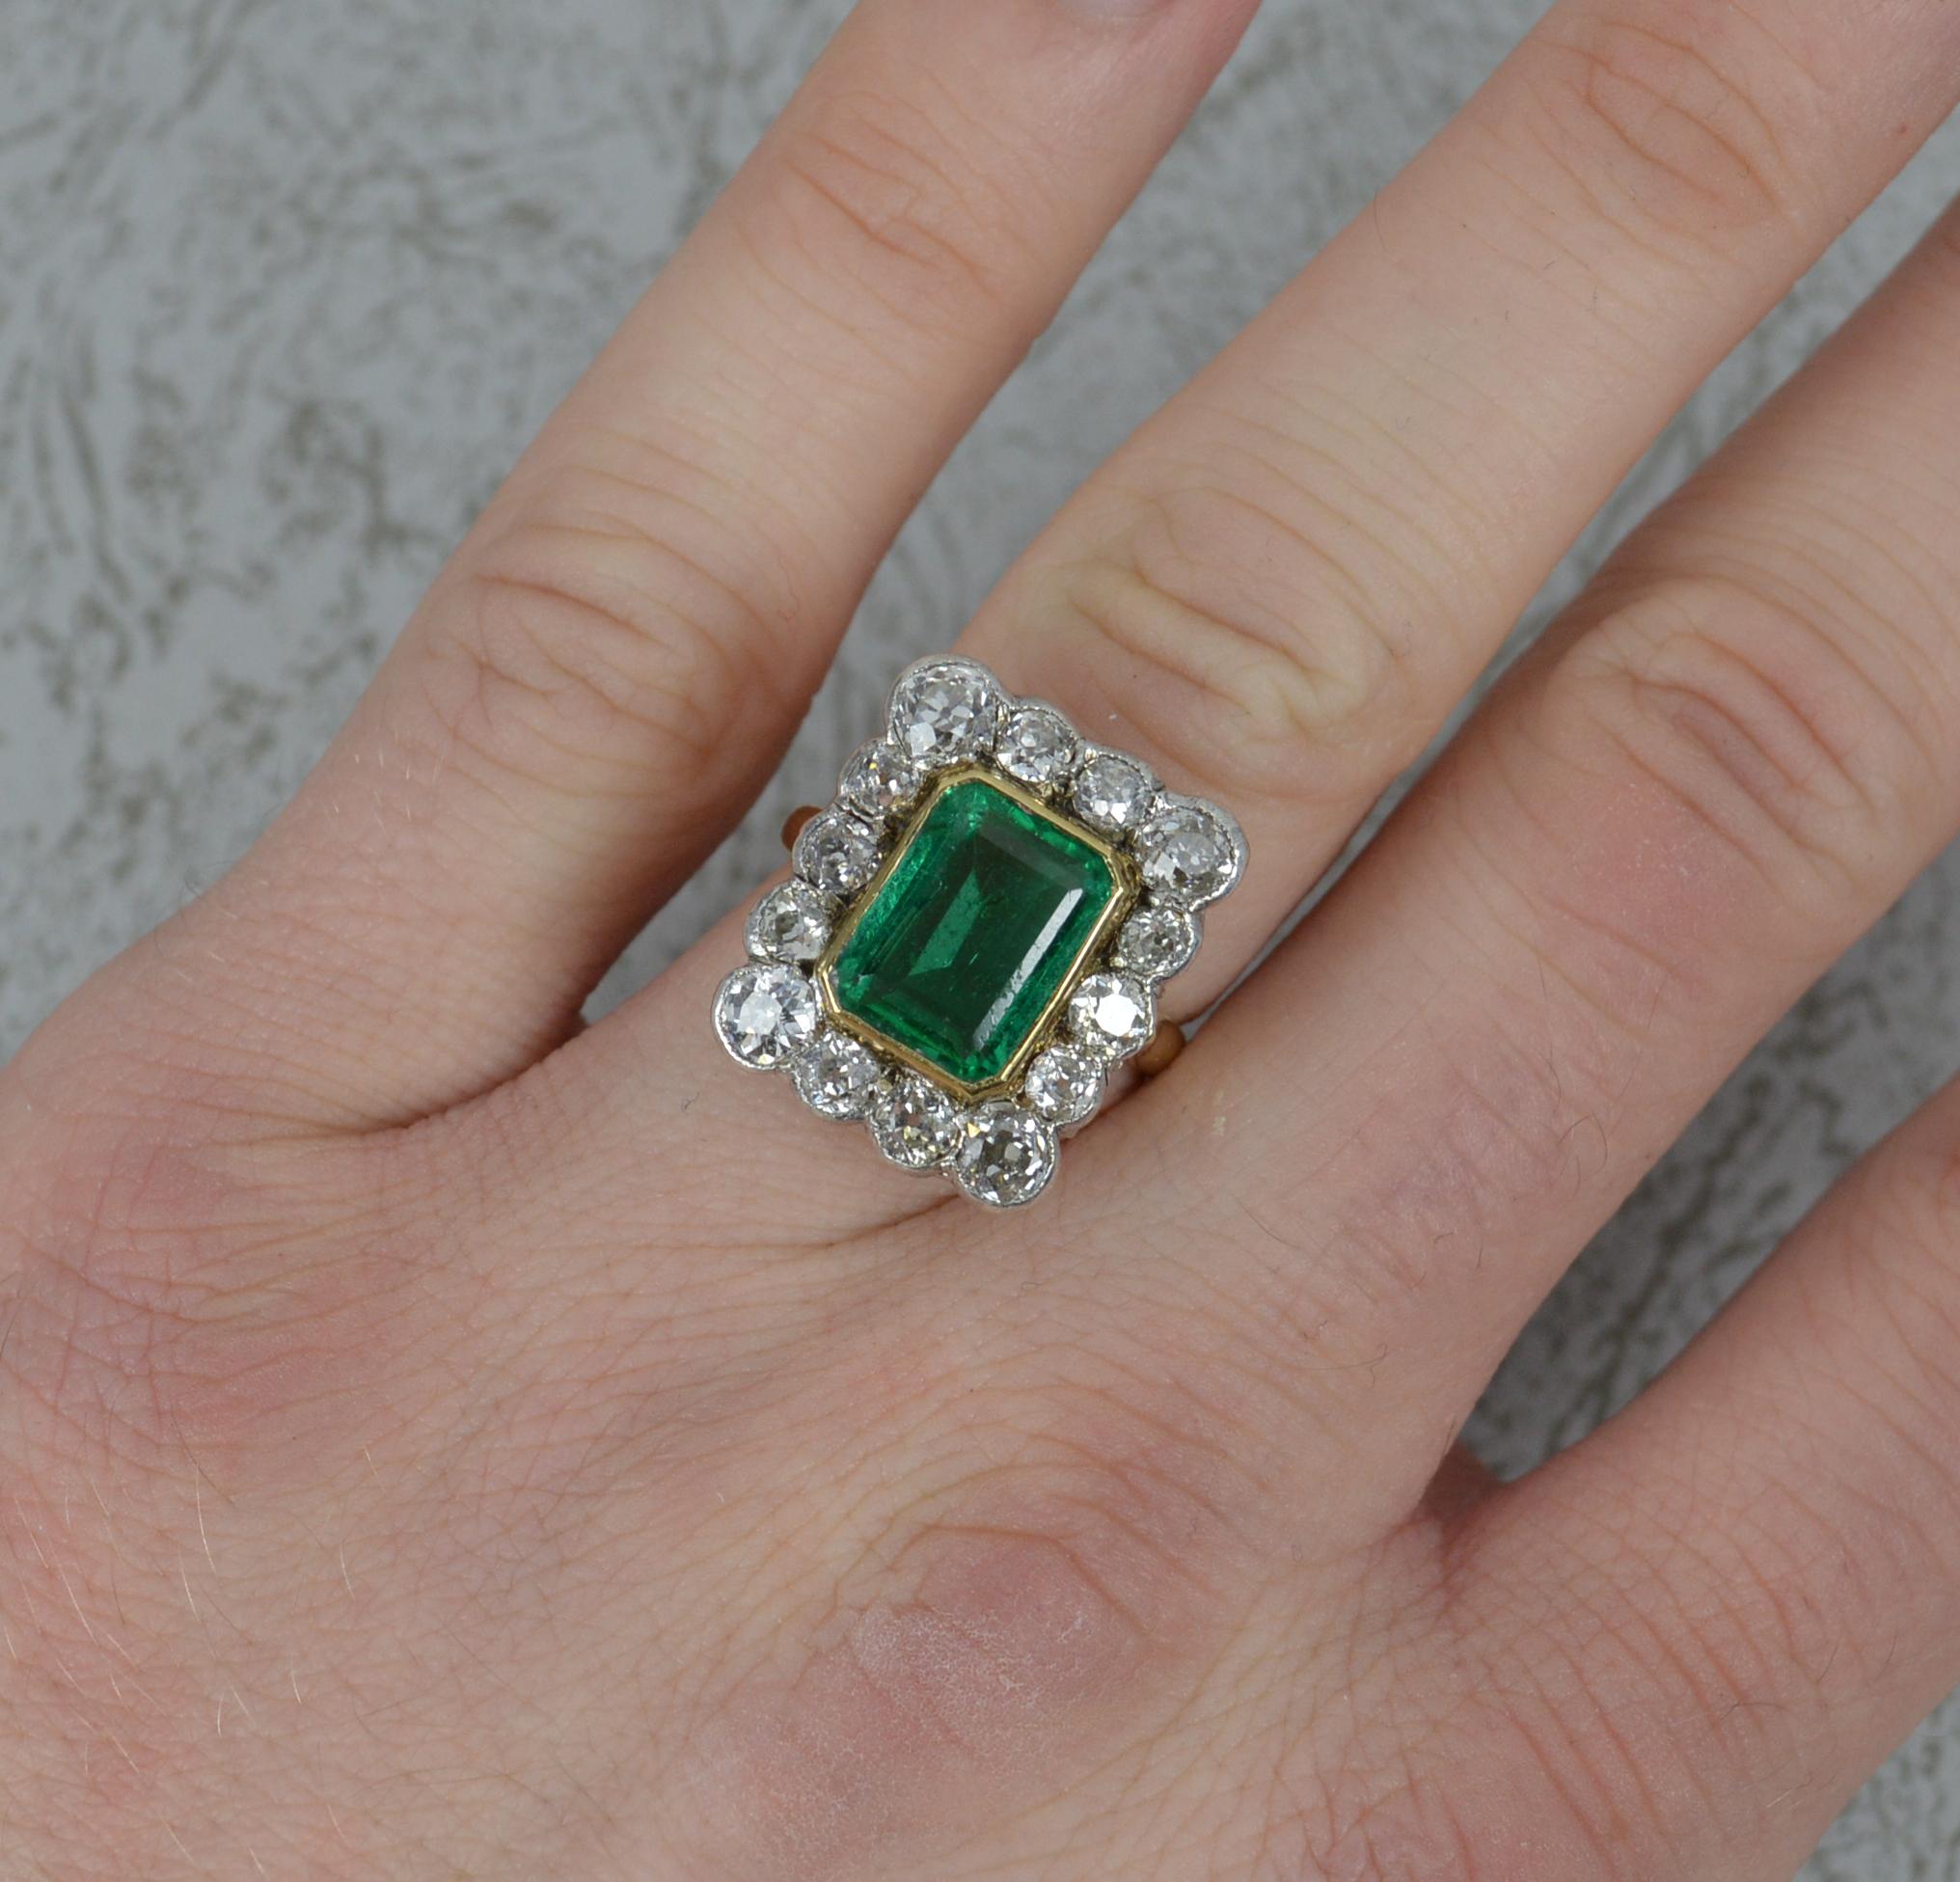 A superb Emerald and Diamond cluster ring, circa 1910.
Solid 18 carat yellow gold shank with platinum head setting.
8.3mm x 10.9mm natural emerald. Complete with certificate confirming natural emerald, minor enhancement only.
Surrounding are